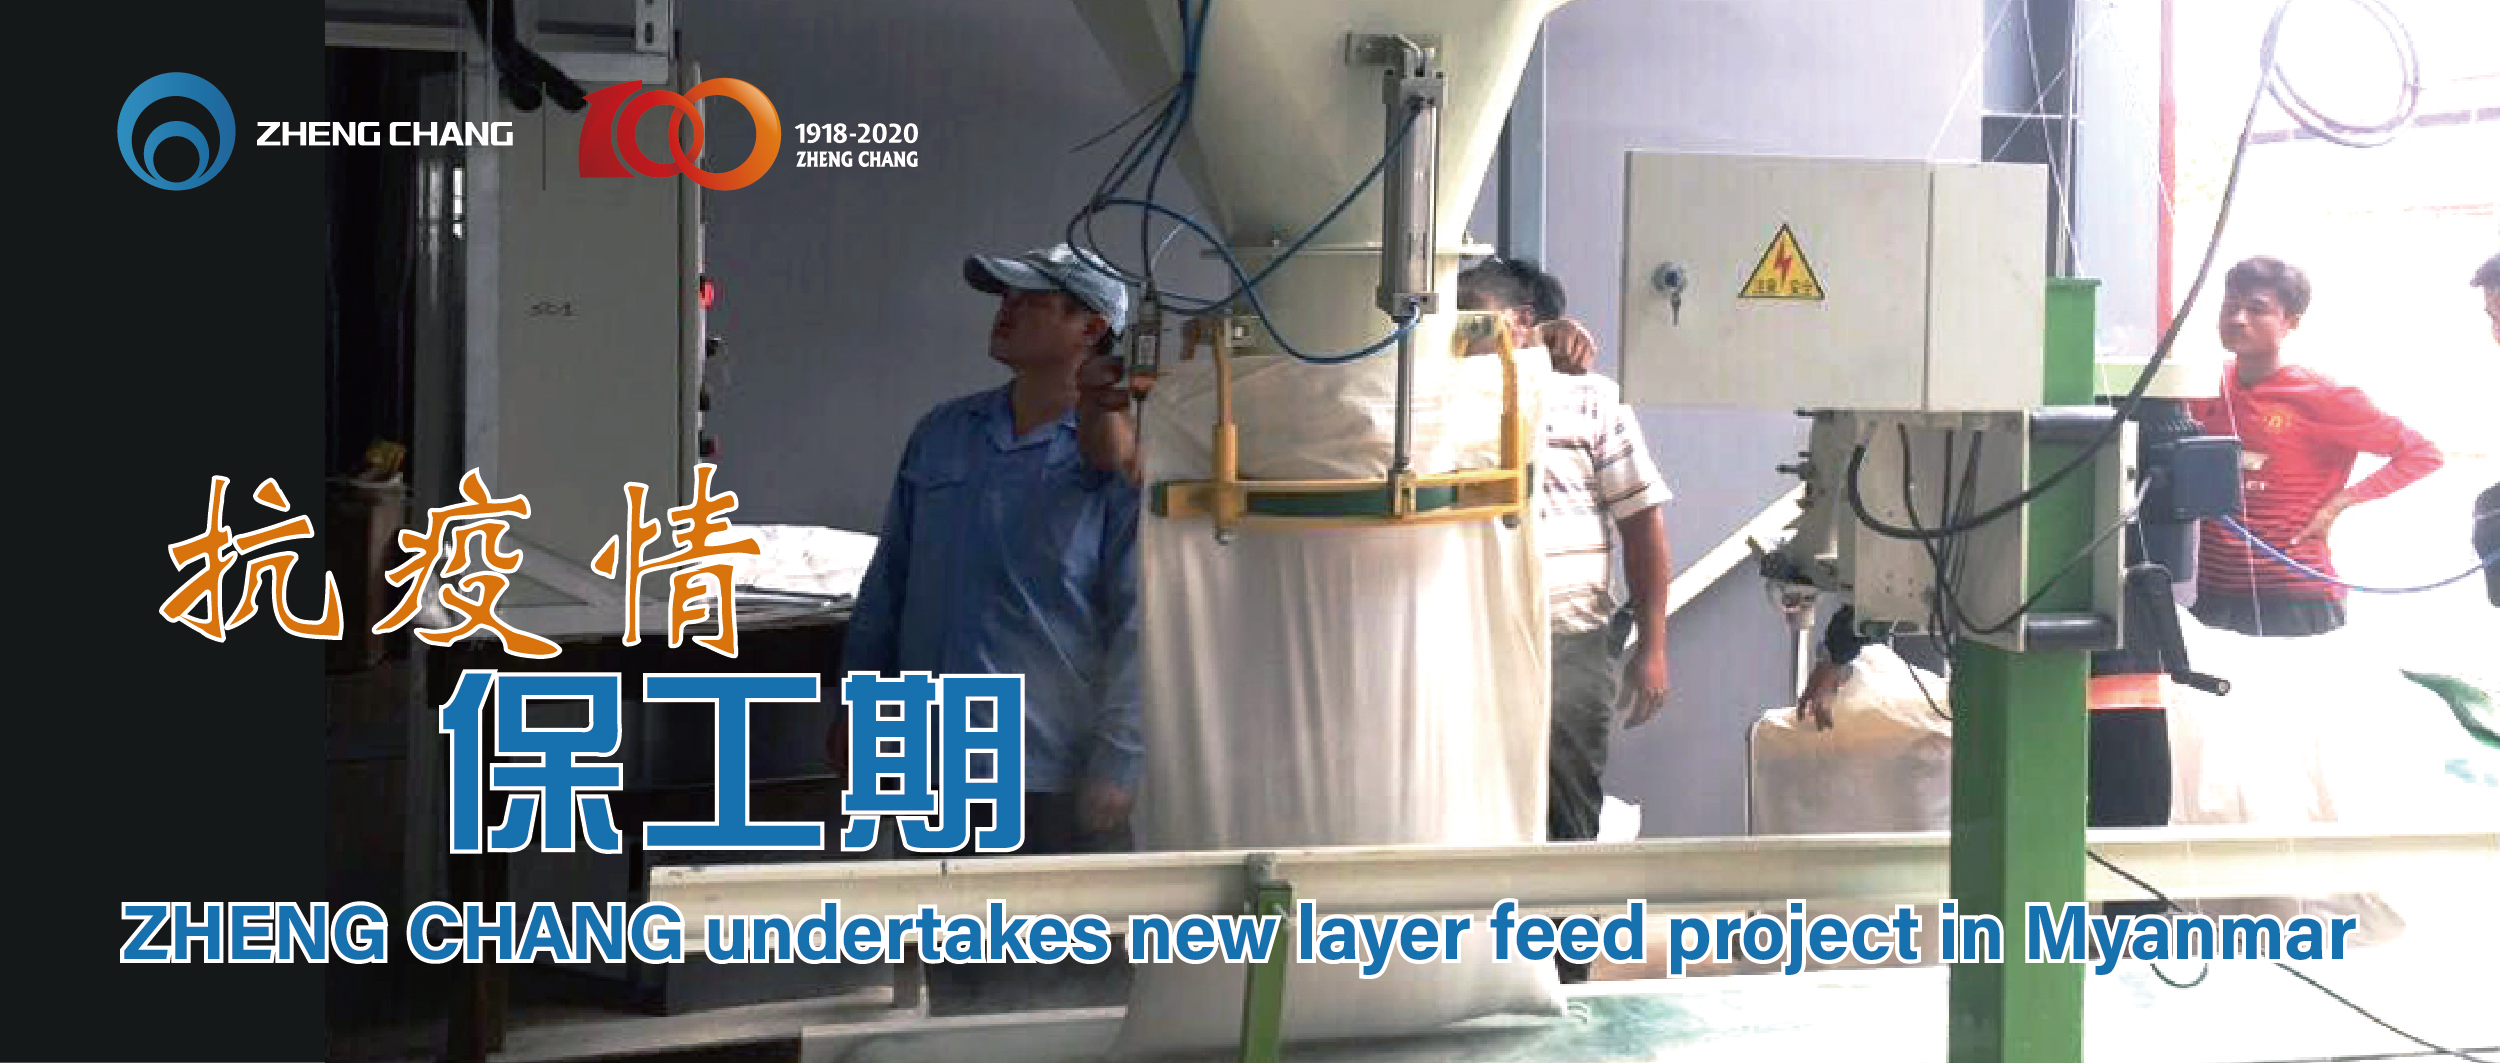 ZHENG CHANG Undertakes New Layer Feed Project in Myanmar